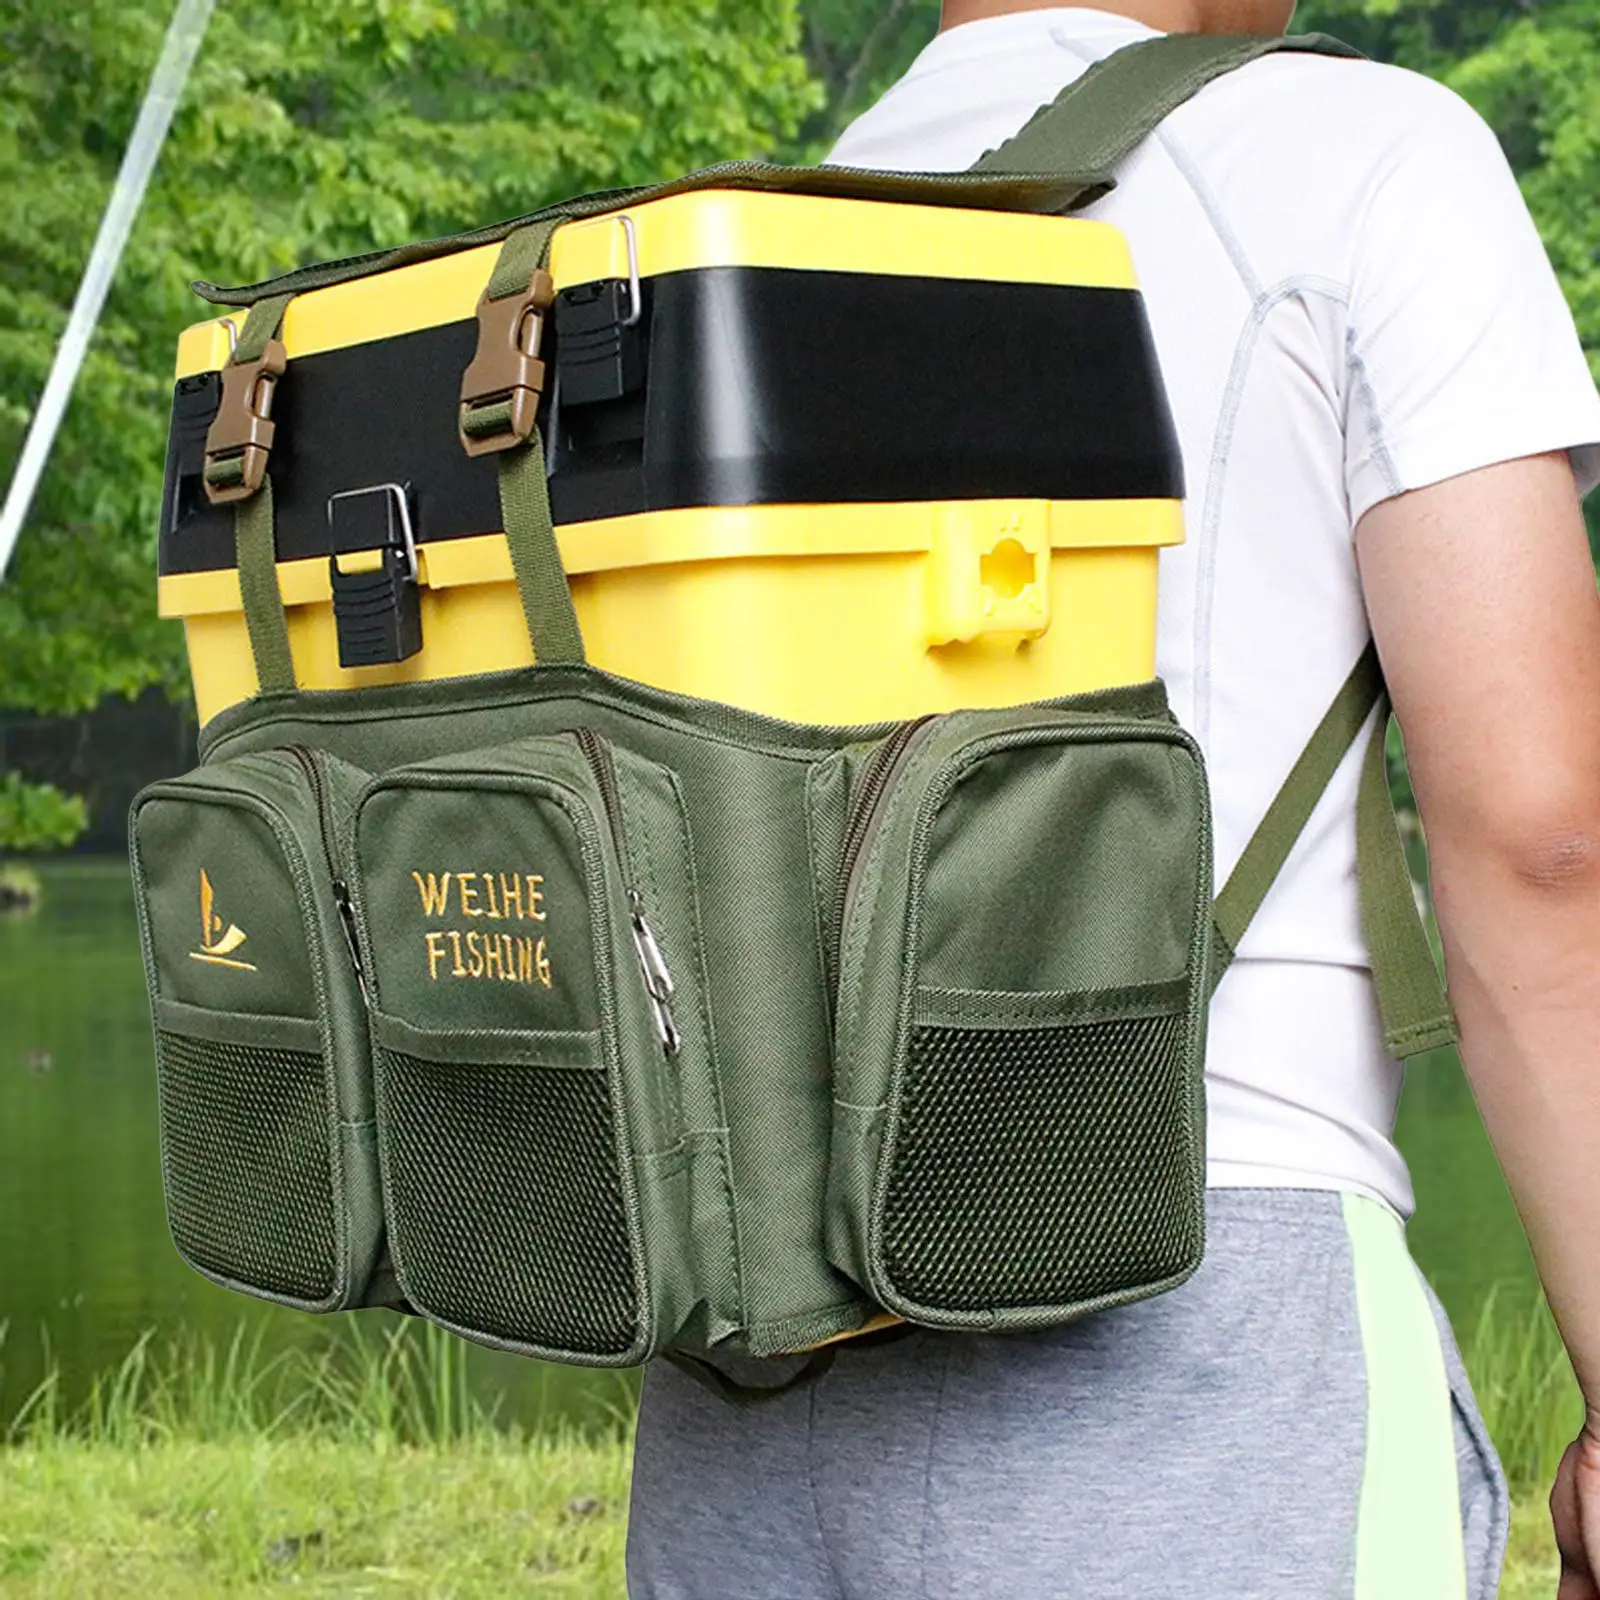 Multifunctional Fishing Tackle Storage Bag Resistant Lure Gears Storage Pouch Waterproof for Sea Fishing Camping Hiking